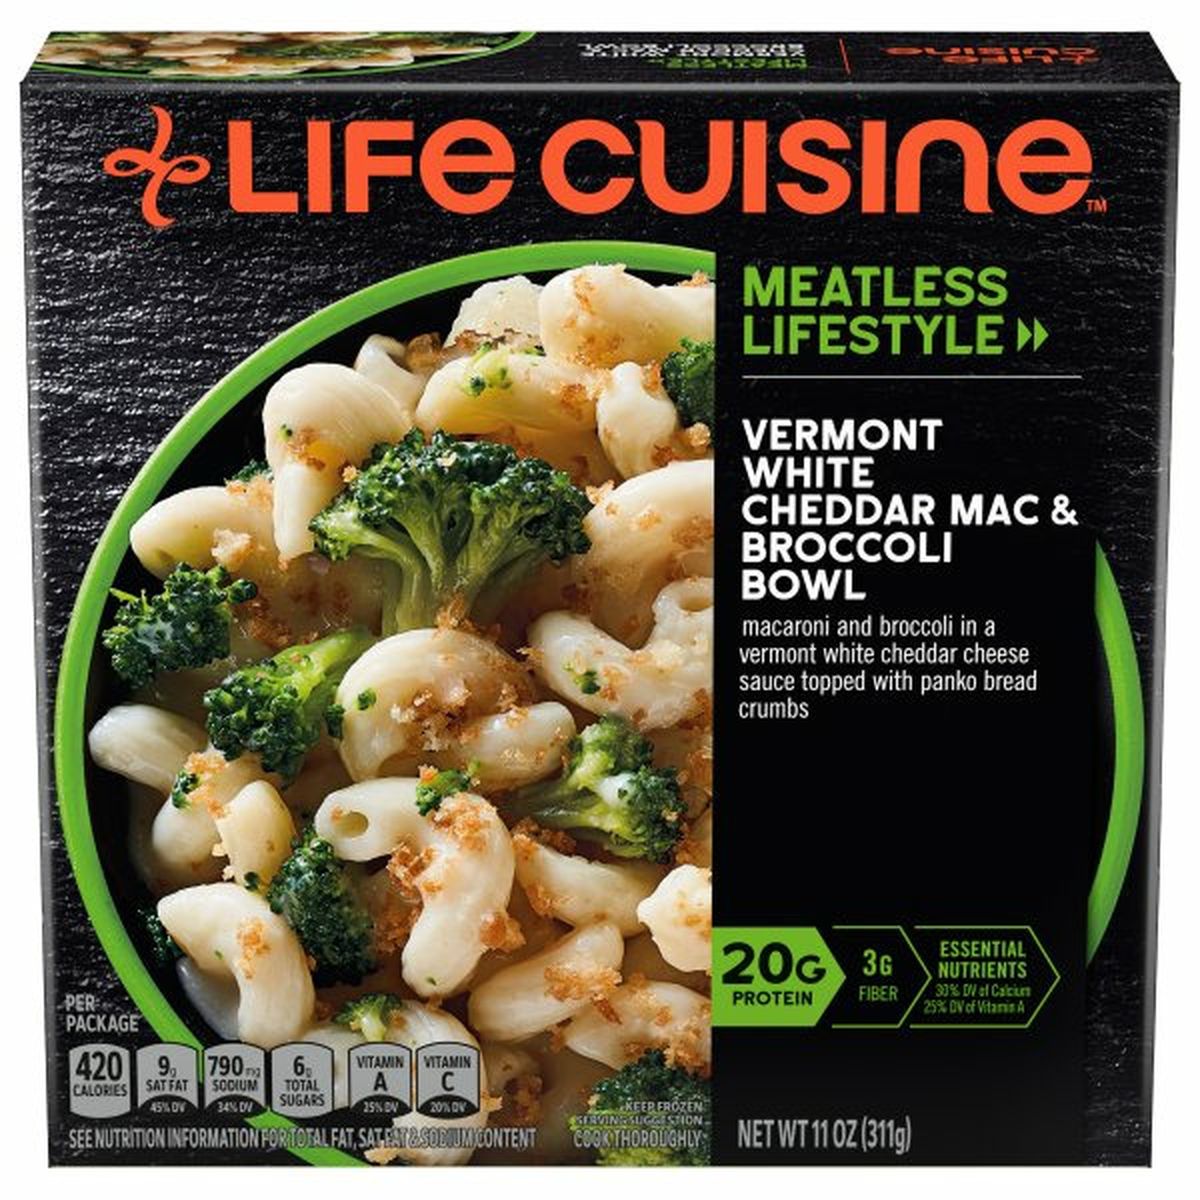 Calories in Life Cuisine Vermont White Cheddar Mac & Broccoli Bowl, Meatless Lifestyle